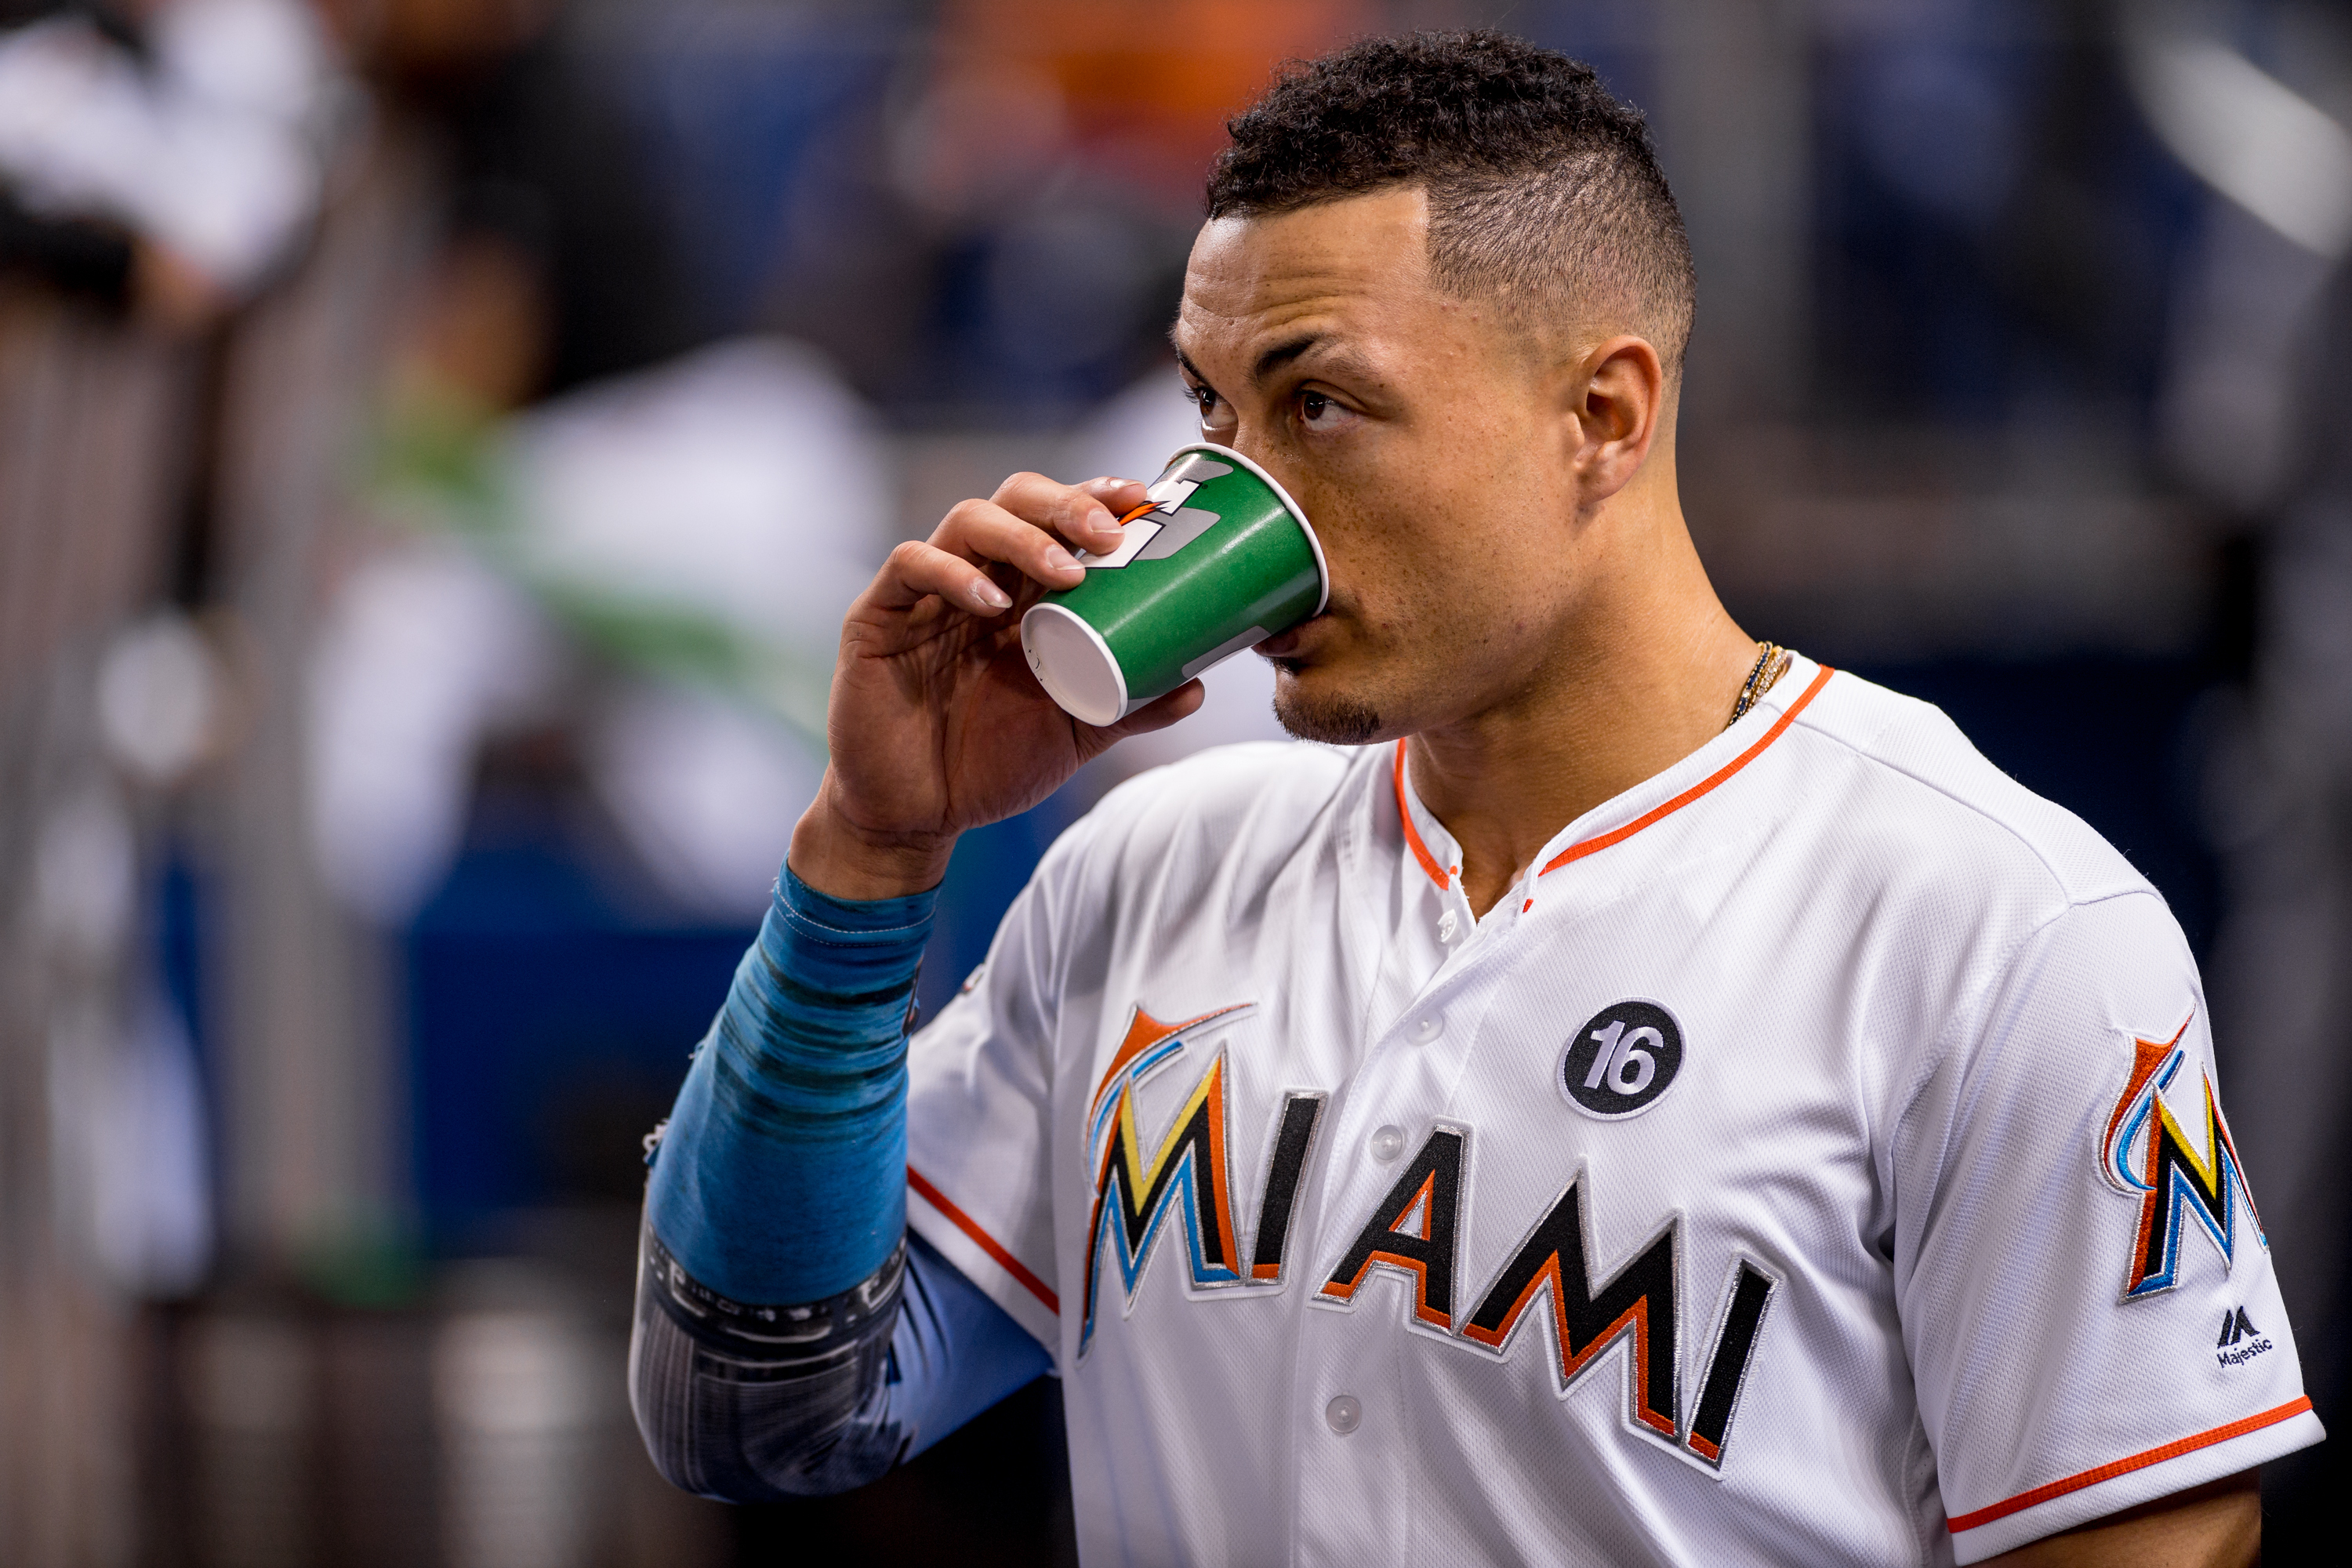 Giancarlo Stanton agrees to $325-million contract with Miami Marlins - Los  Angeles Times